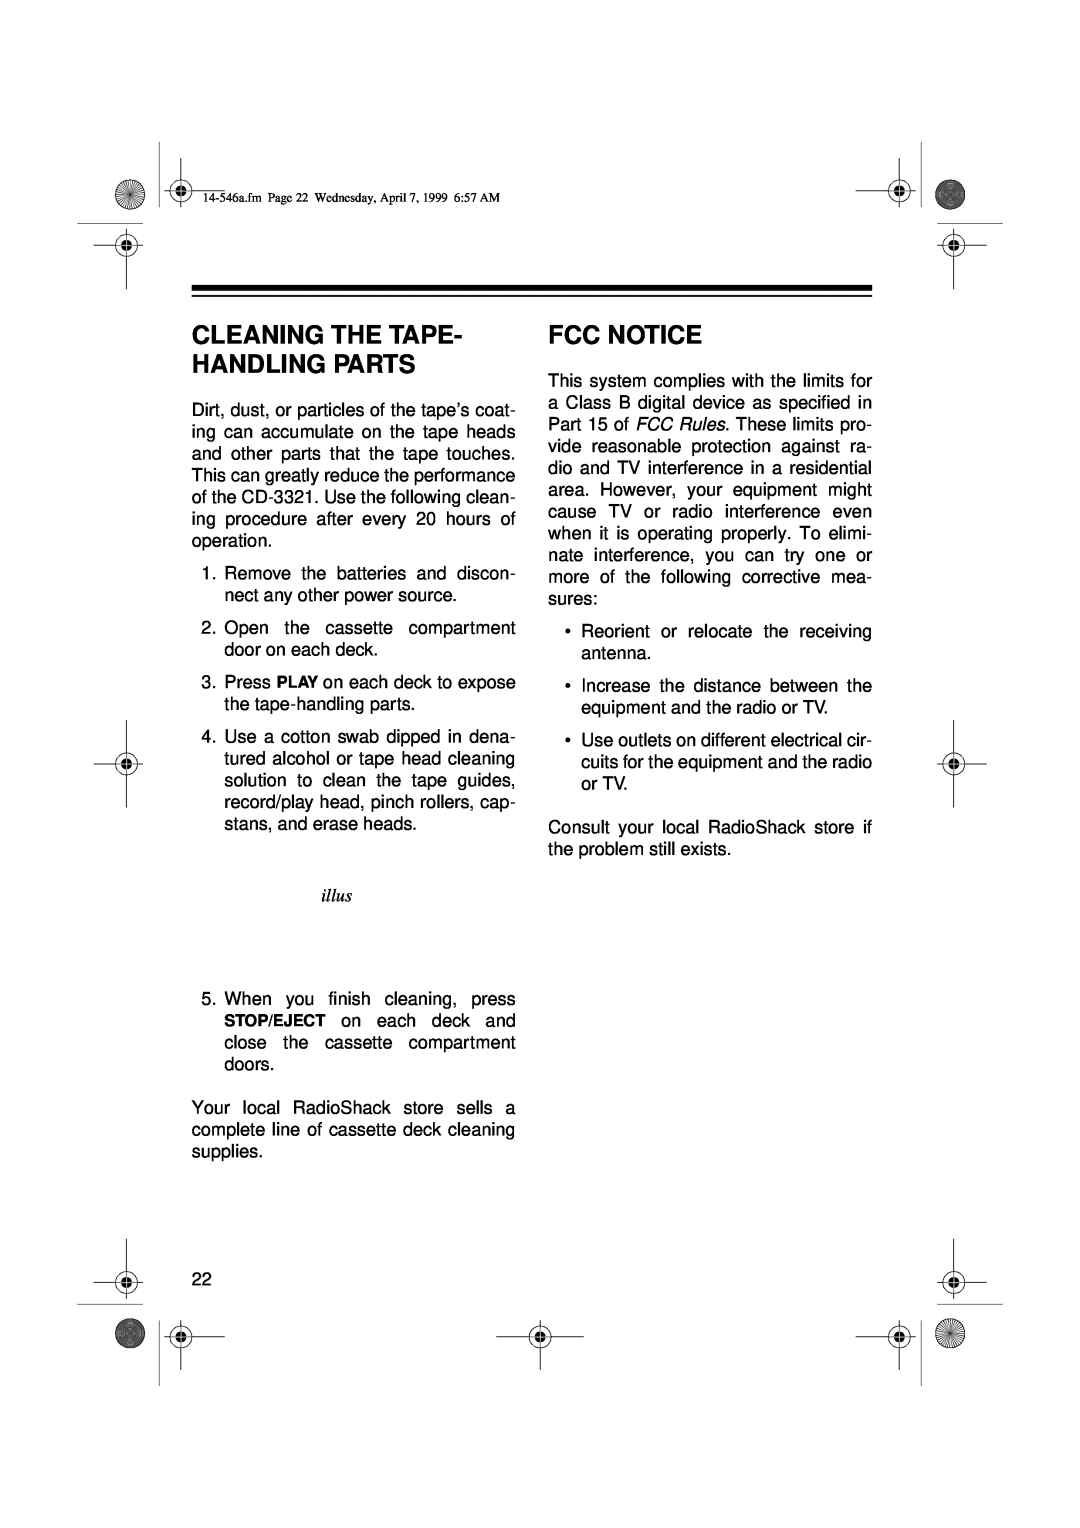 Optimus 14-546A, CD-3321 owner manual Fcc Notice, Cleaning The Tape- Handling Parts, illus 